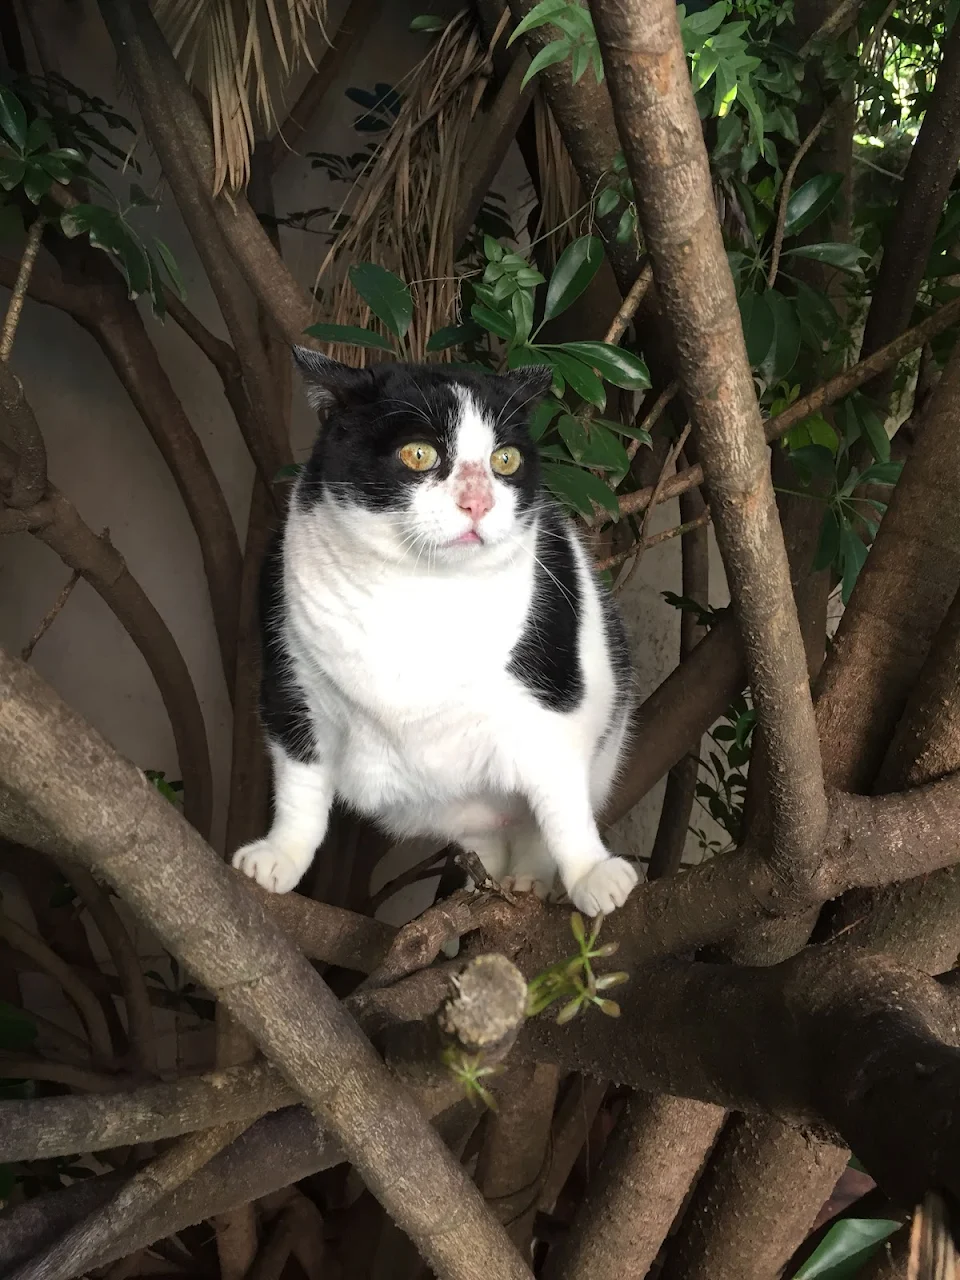 This cat in a tree